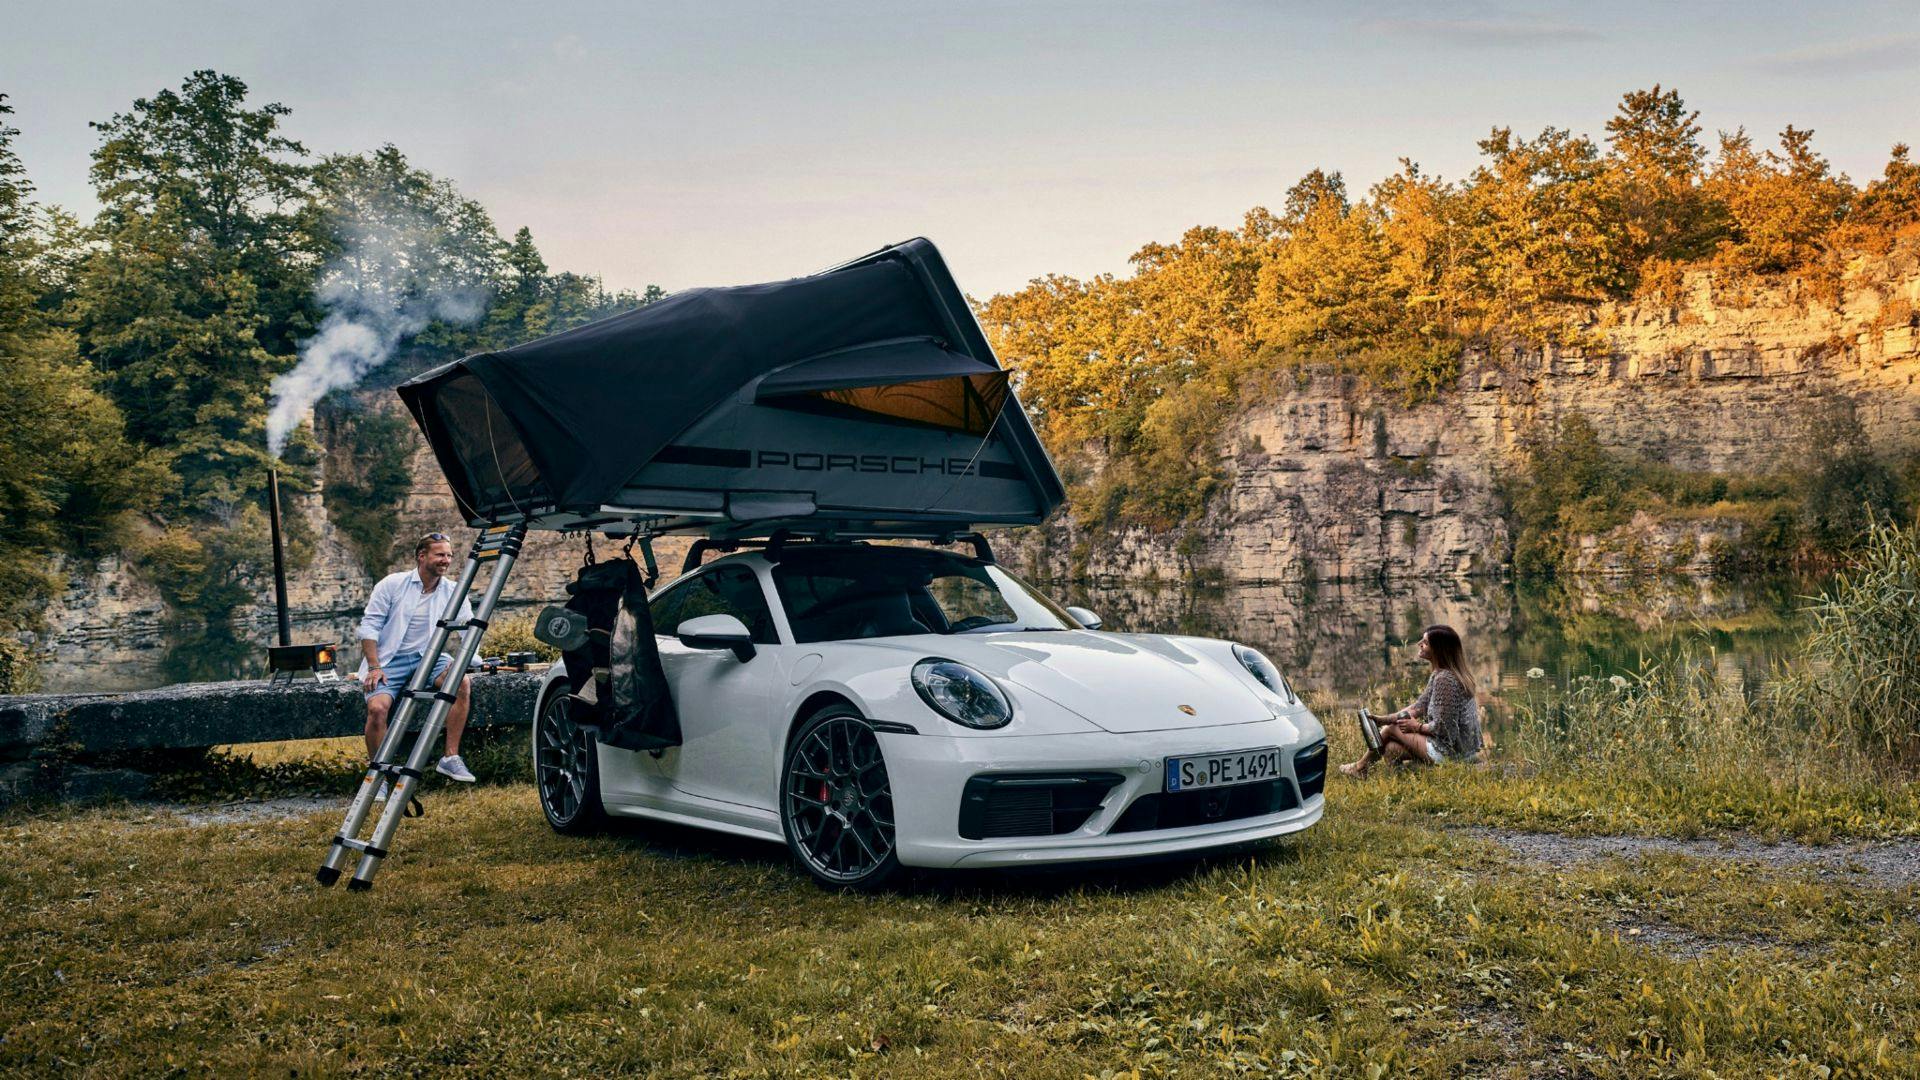 Porsche rooftop tent 911 with tent pitched and ladder out along riverside